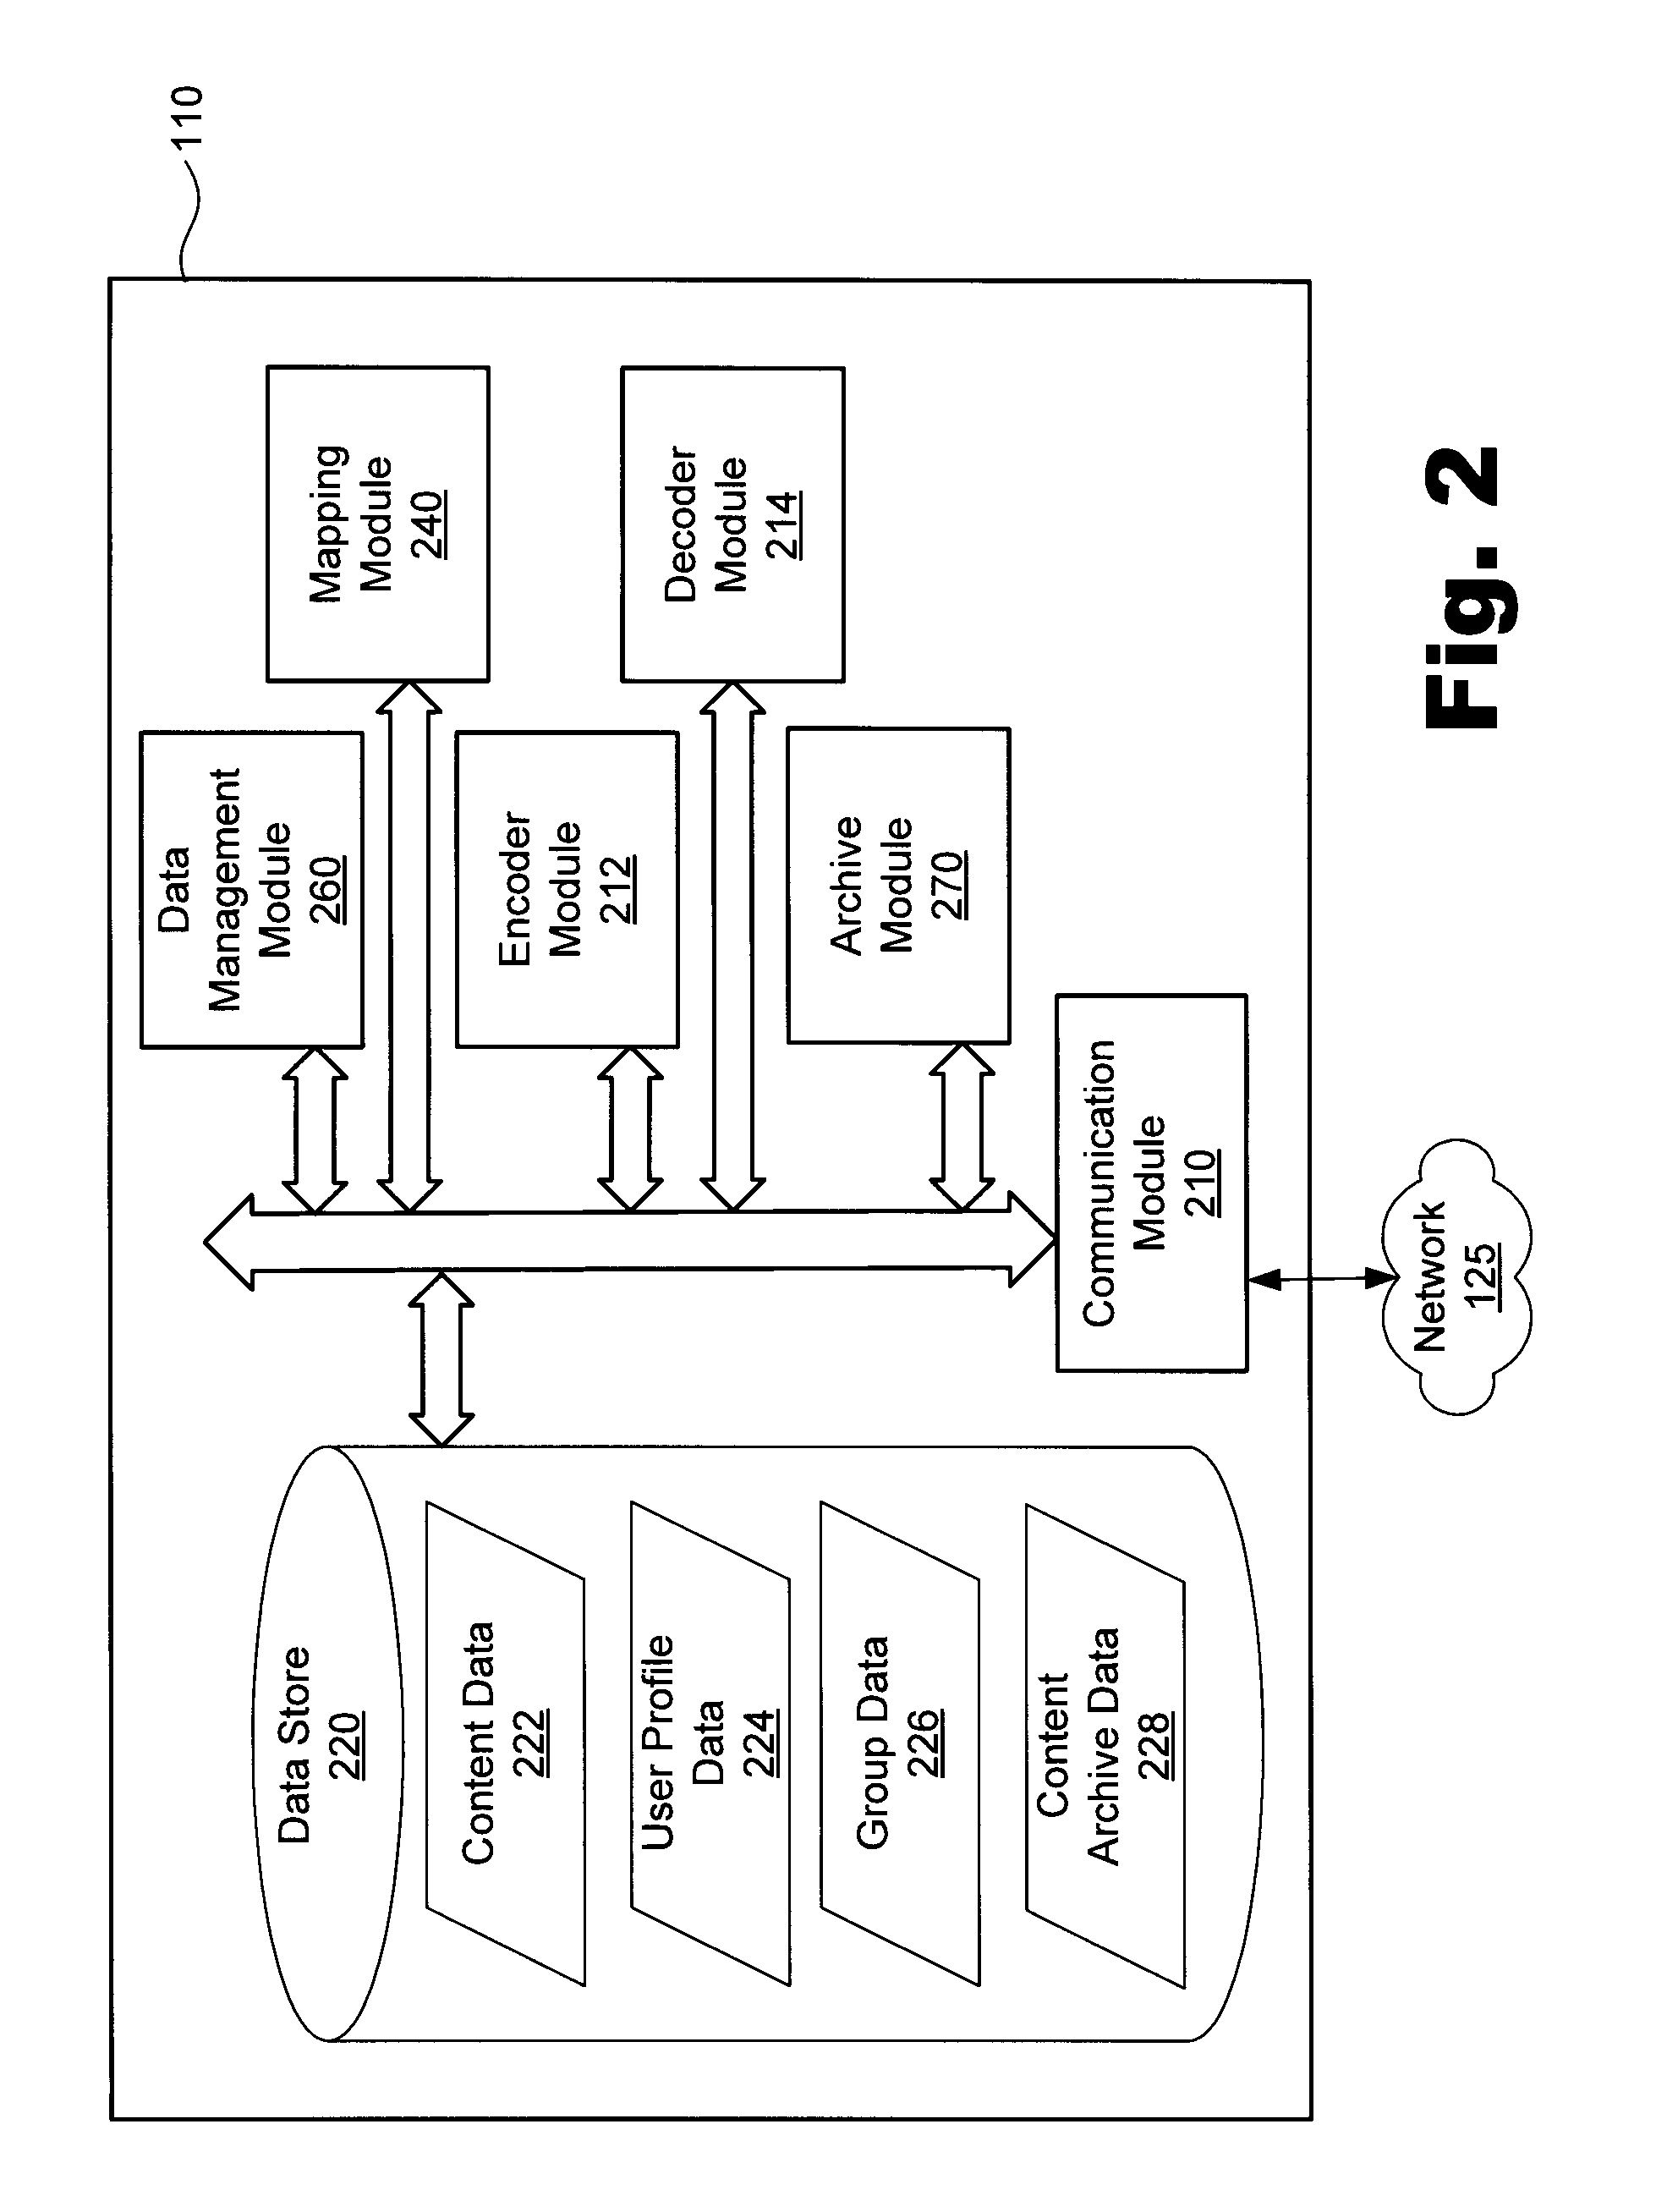 Interactive group content systems and methods